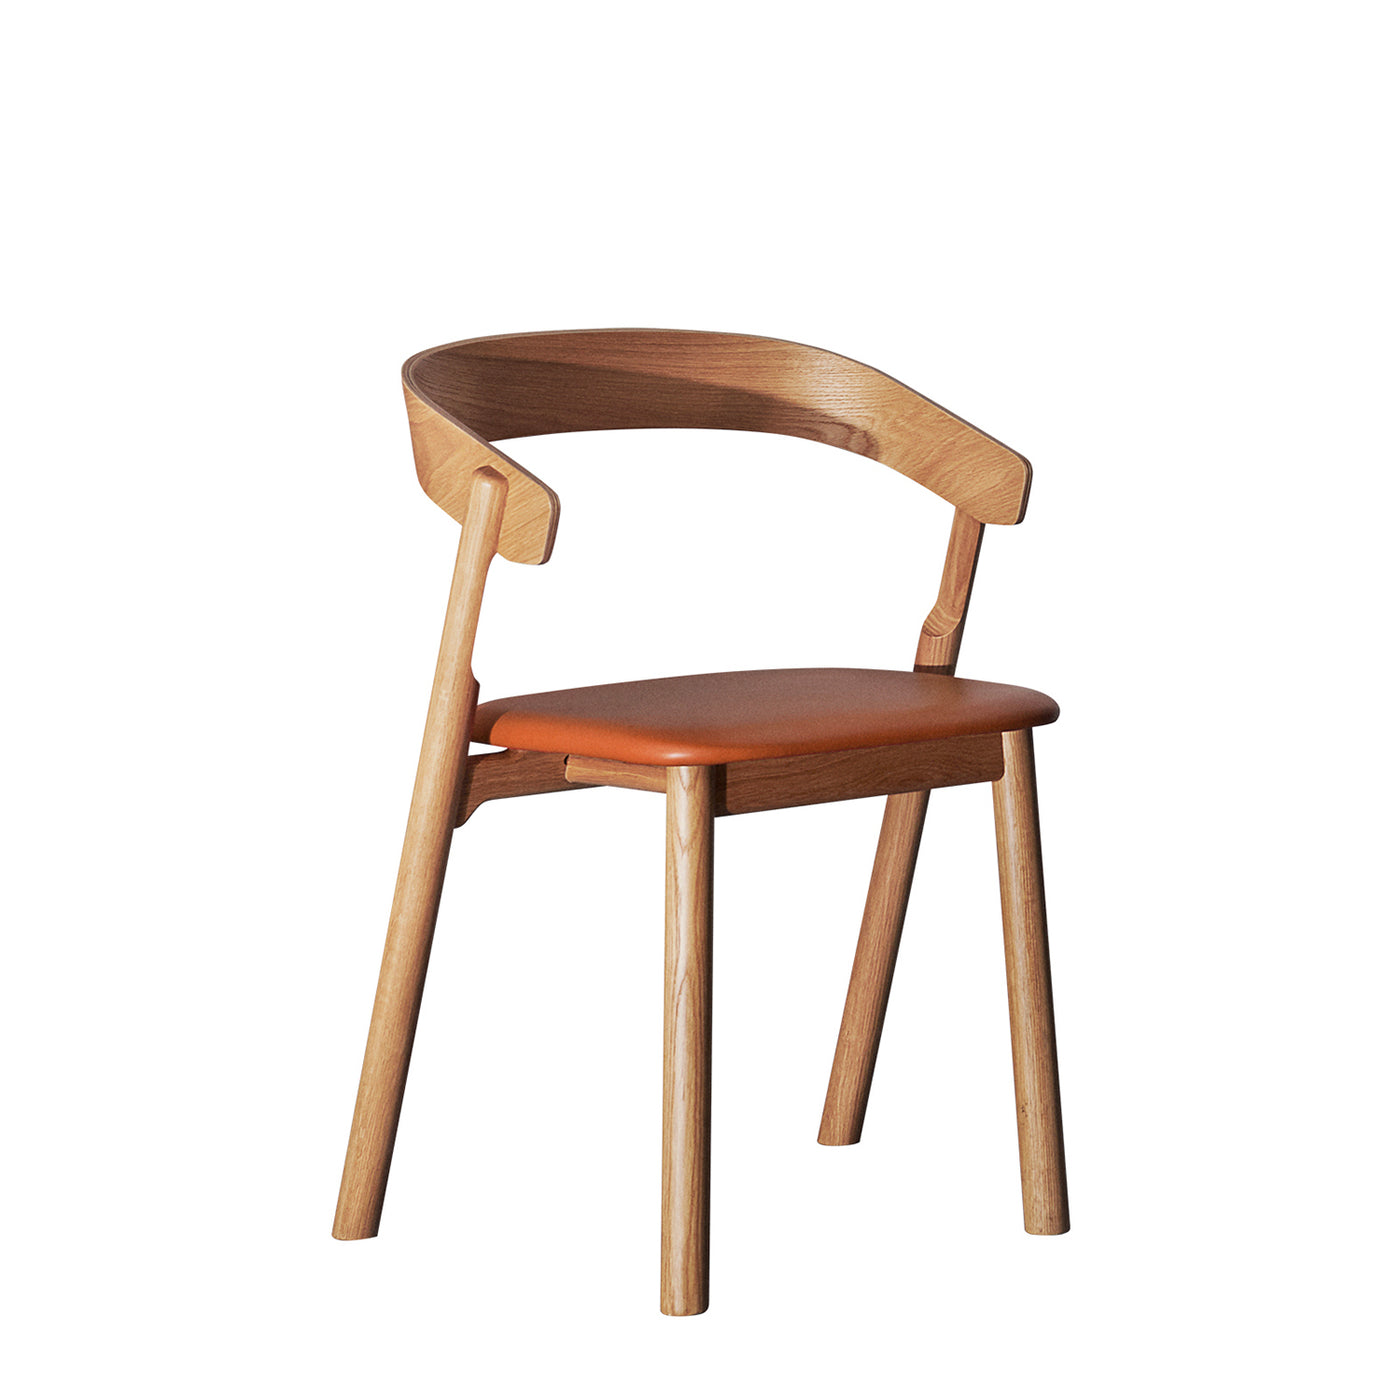 NUDE dining chair with upholstery